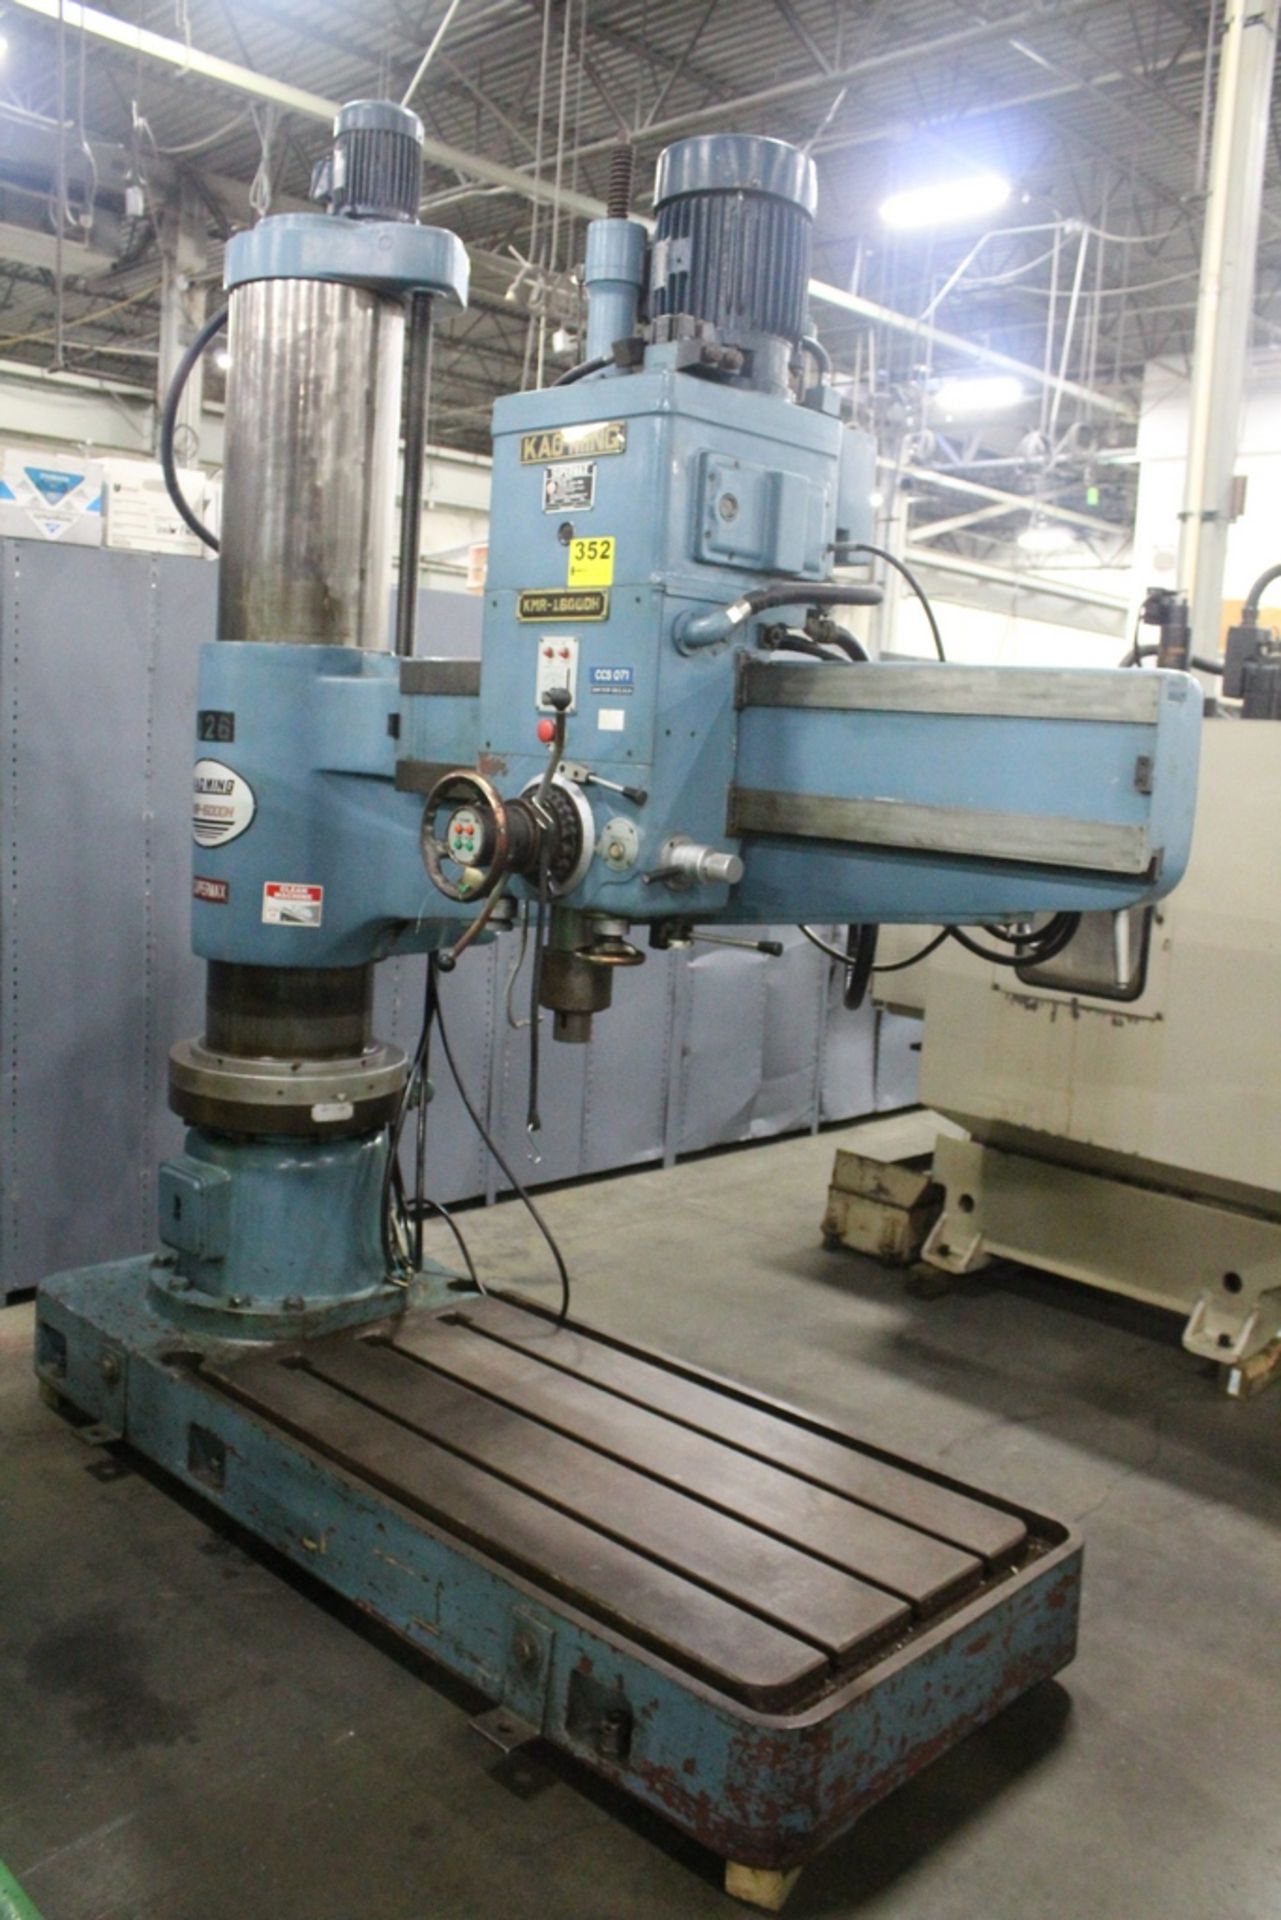 KAO MING MODEL KMR-1600DH SUPERMAX RADIAL ARM DRILL, 5' X 16" COLUMN, S/N 1888 (SHIPPING WEIGHT 10,